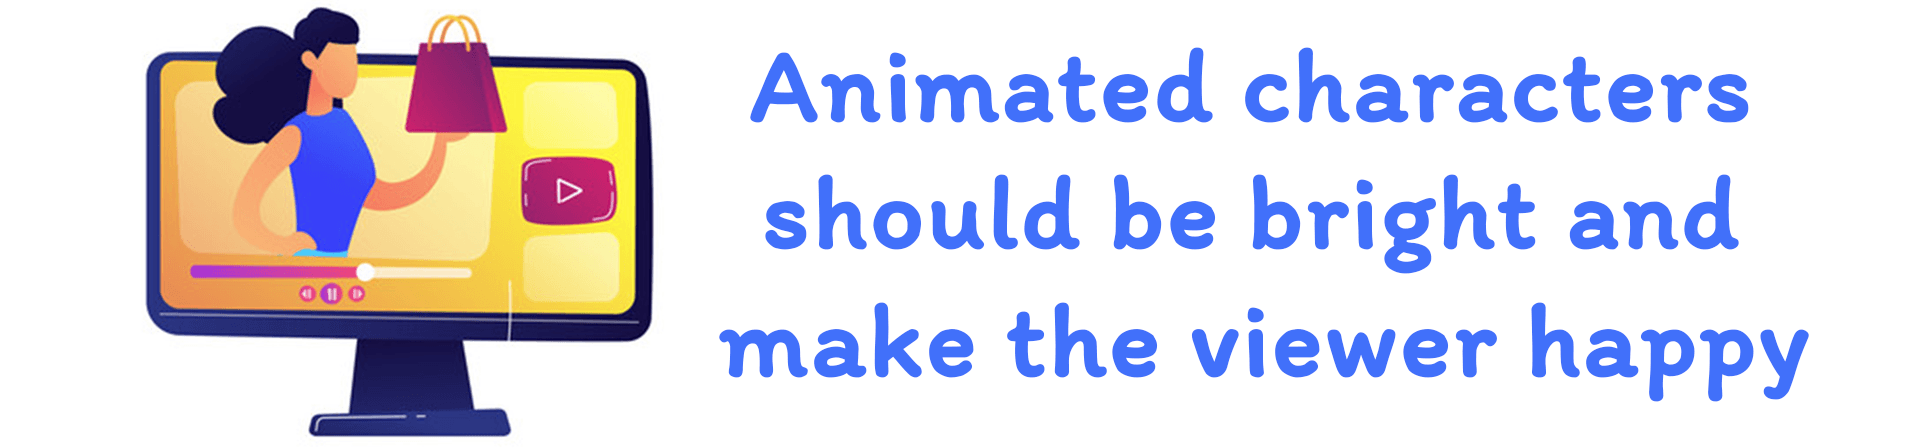 Using animated characters - enhance the effectiveness of the video